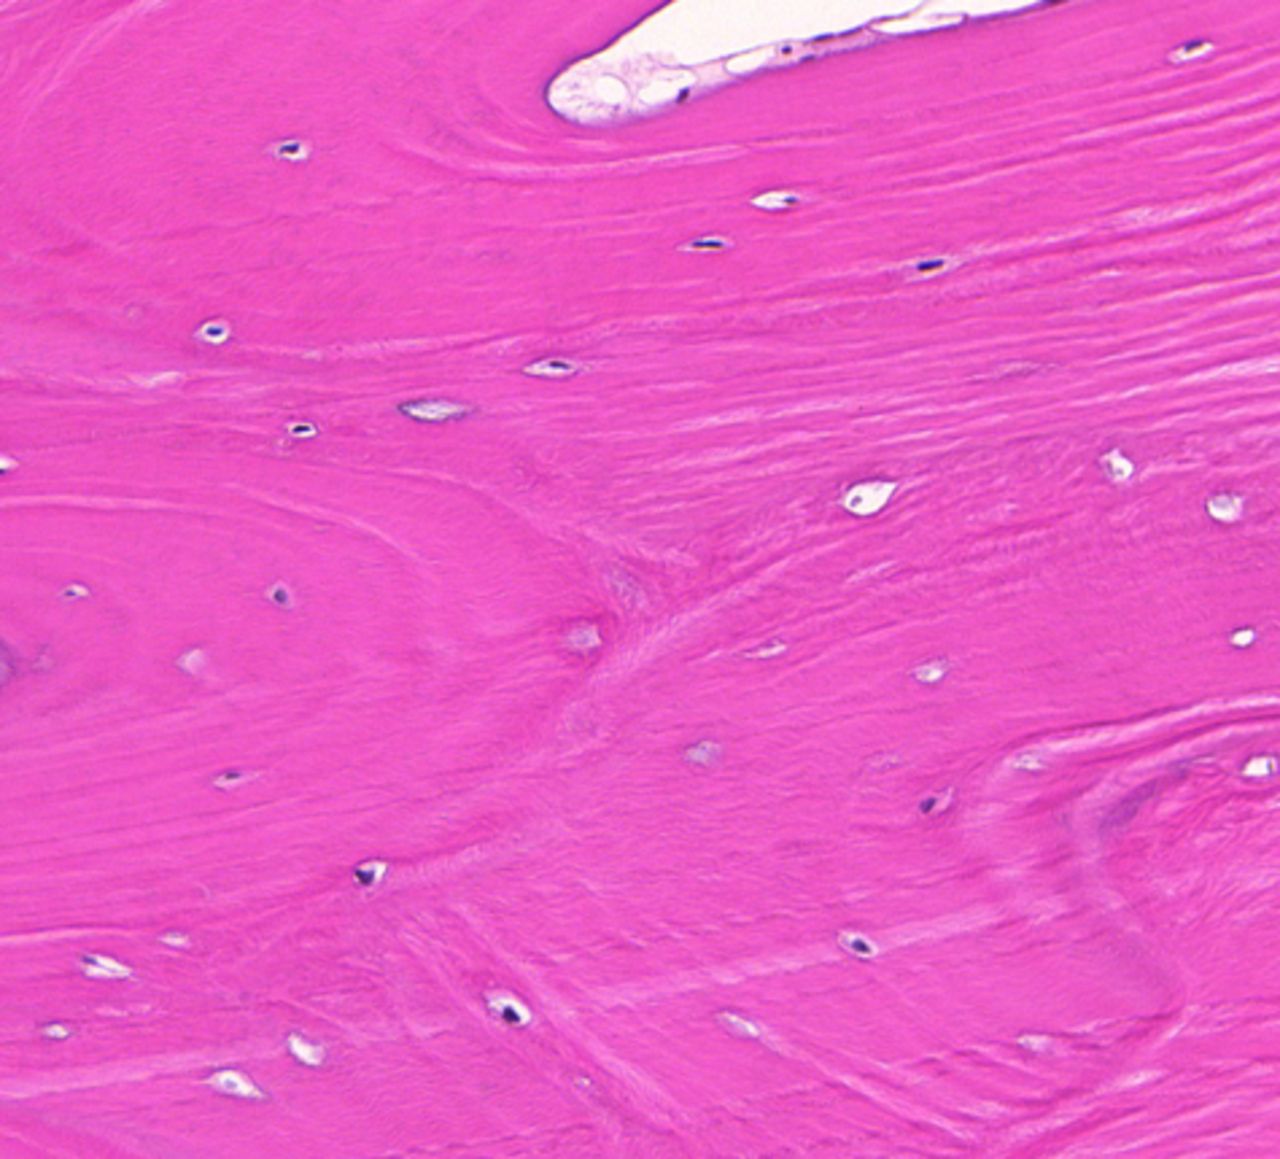 Figs. 4a - 4b 
            Slide from a) the non-posterior
group showing nucleated lacunae (magnification ×20) and b) the hip
with avascular necrosis, showing mostly empty lacuna (magnification
×40, both haematoxylin and eosin).
          